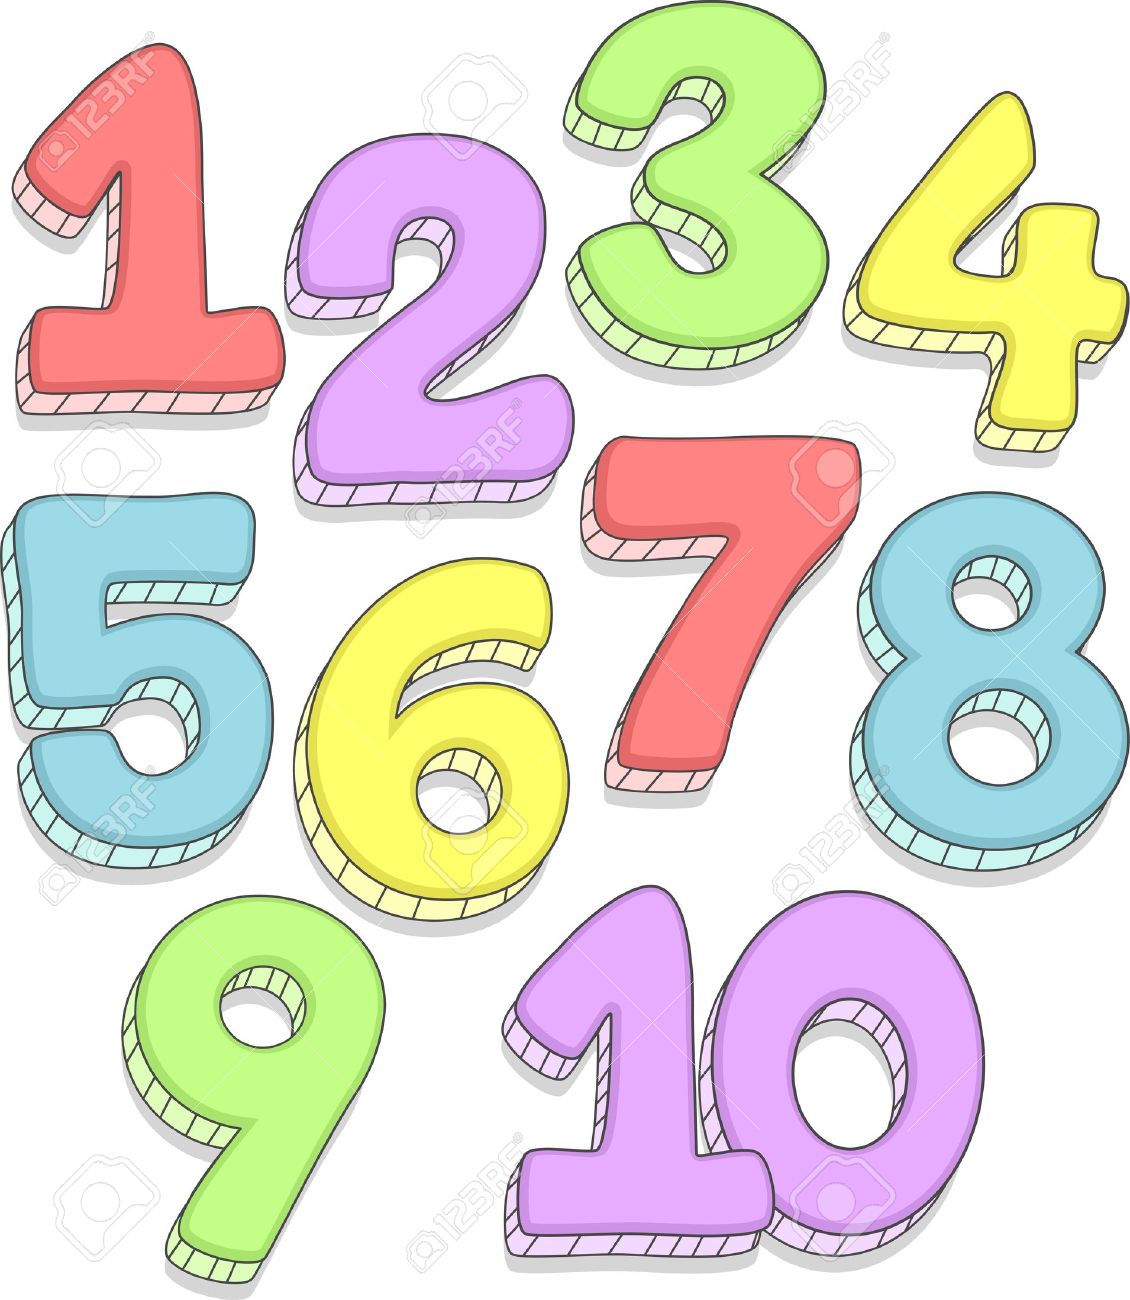 Numbers clipart 0 free clipar